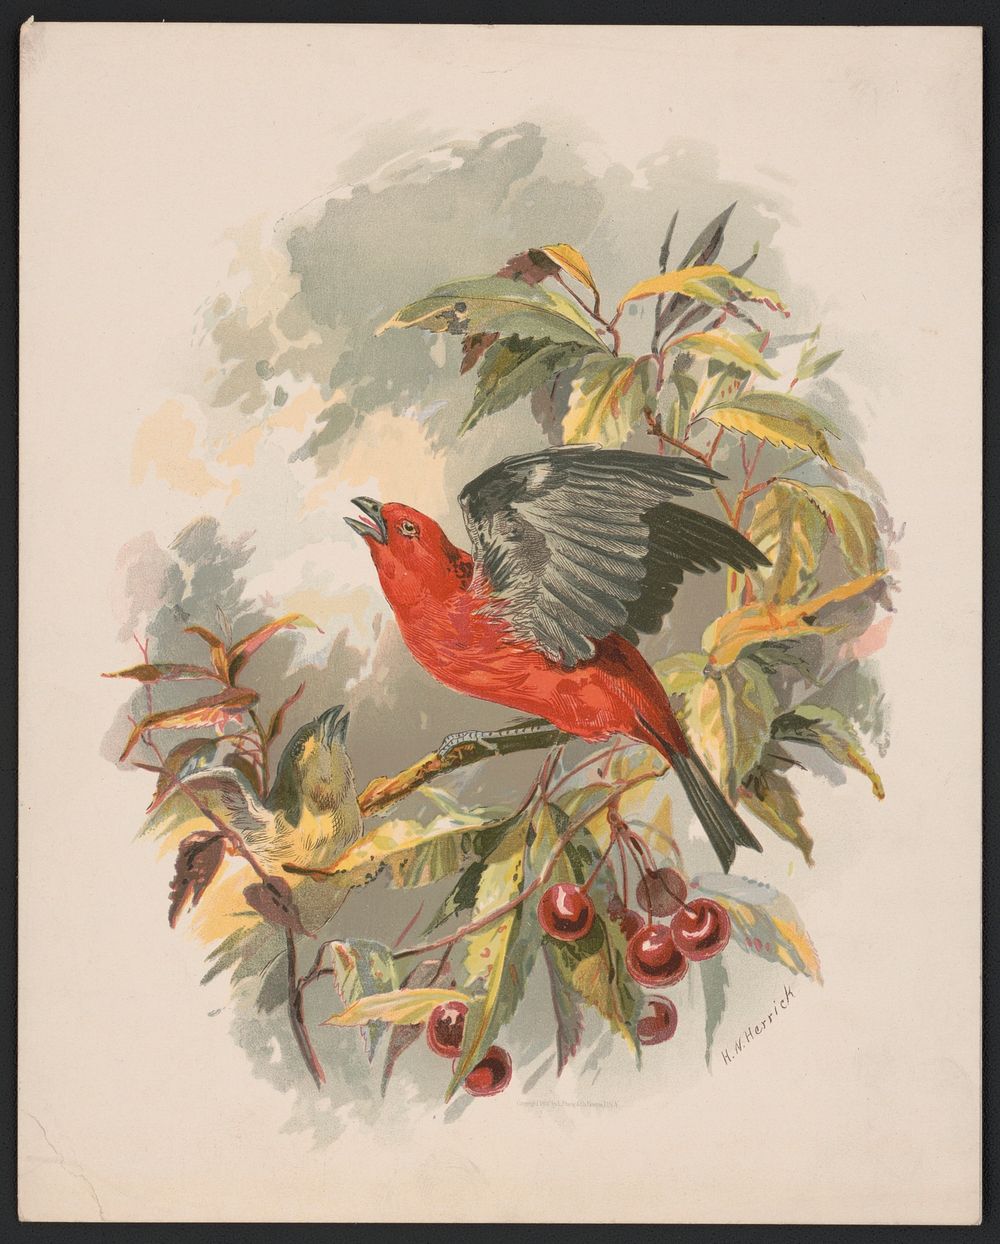 [Scarlet tanager on a cherry tree branch] / H.W. Herrick., L. Prang & Co., publisher